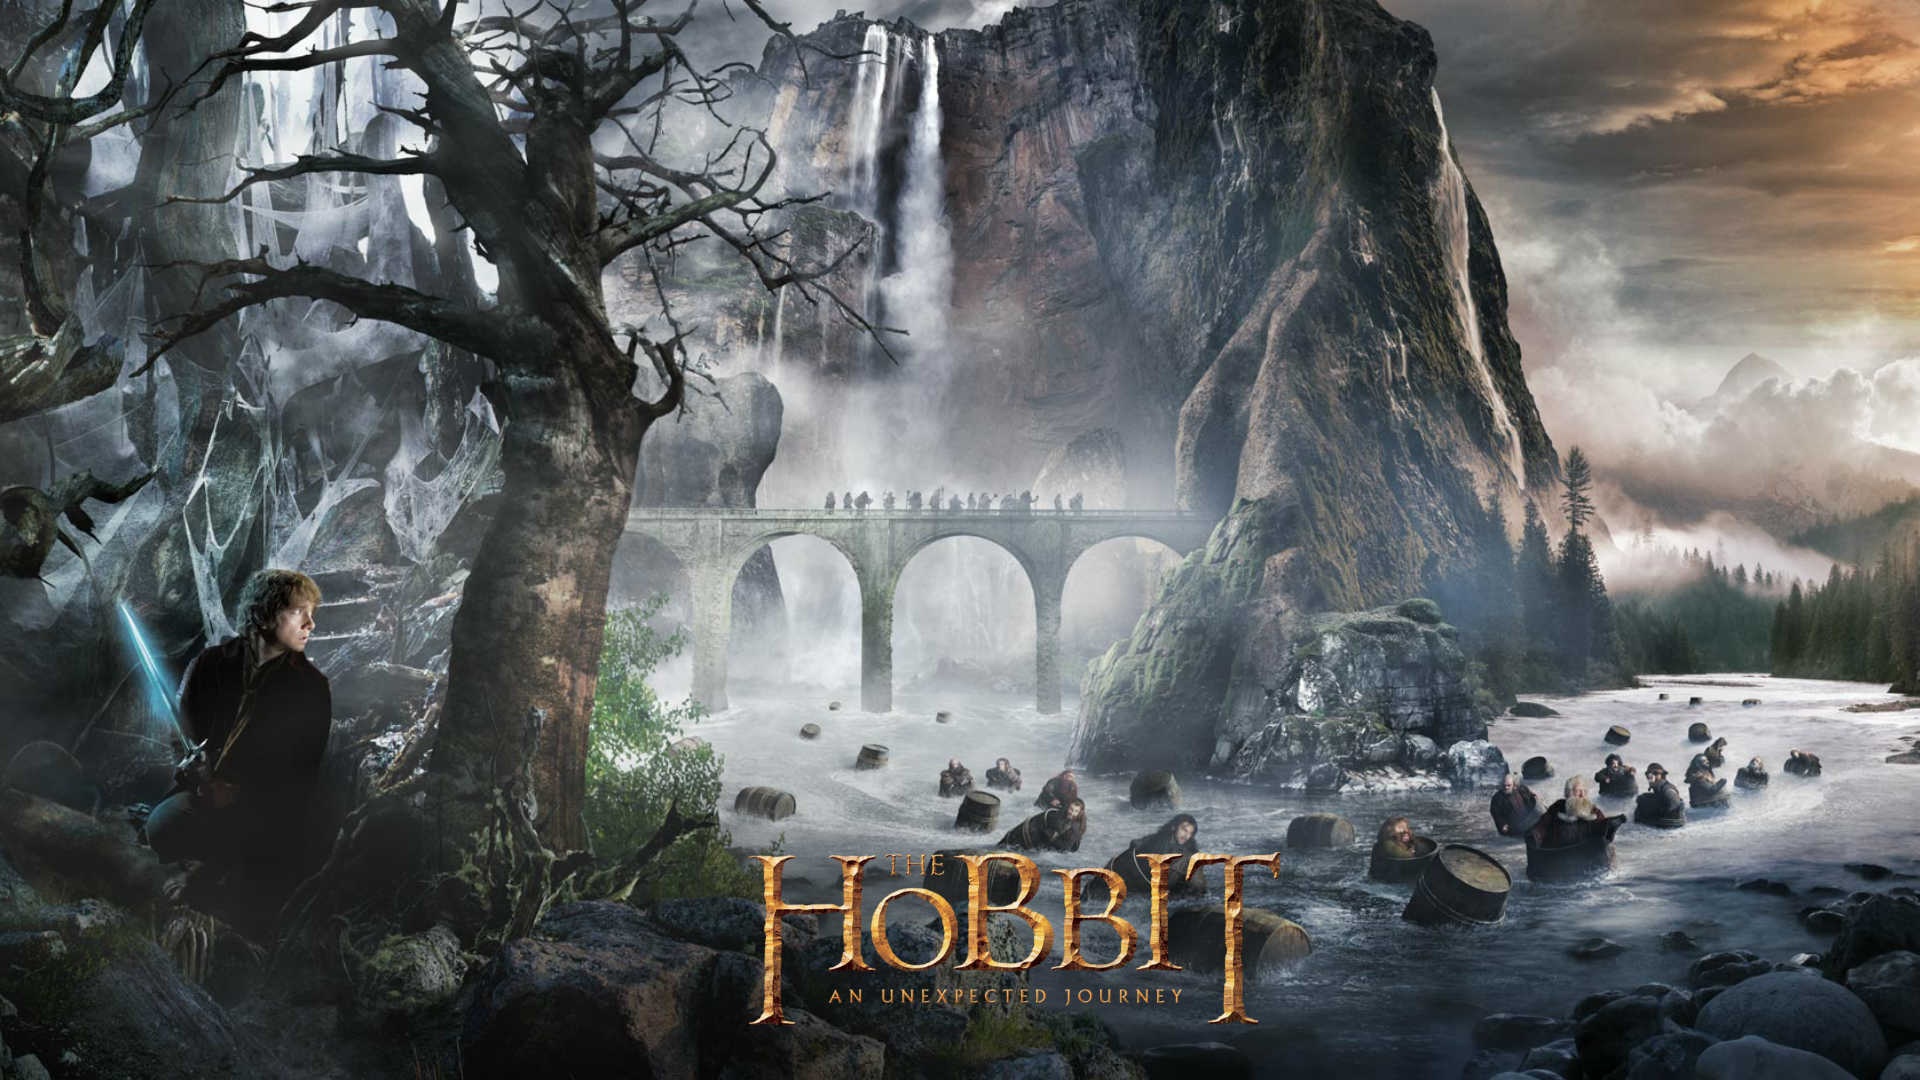 The Hobbit: An Unexpected Journey is being released as a Future Shop Exclusive Blu-ray Steelbook in Canada